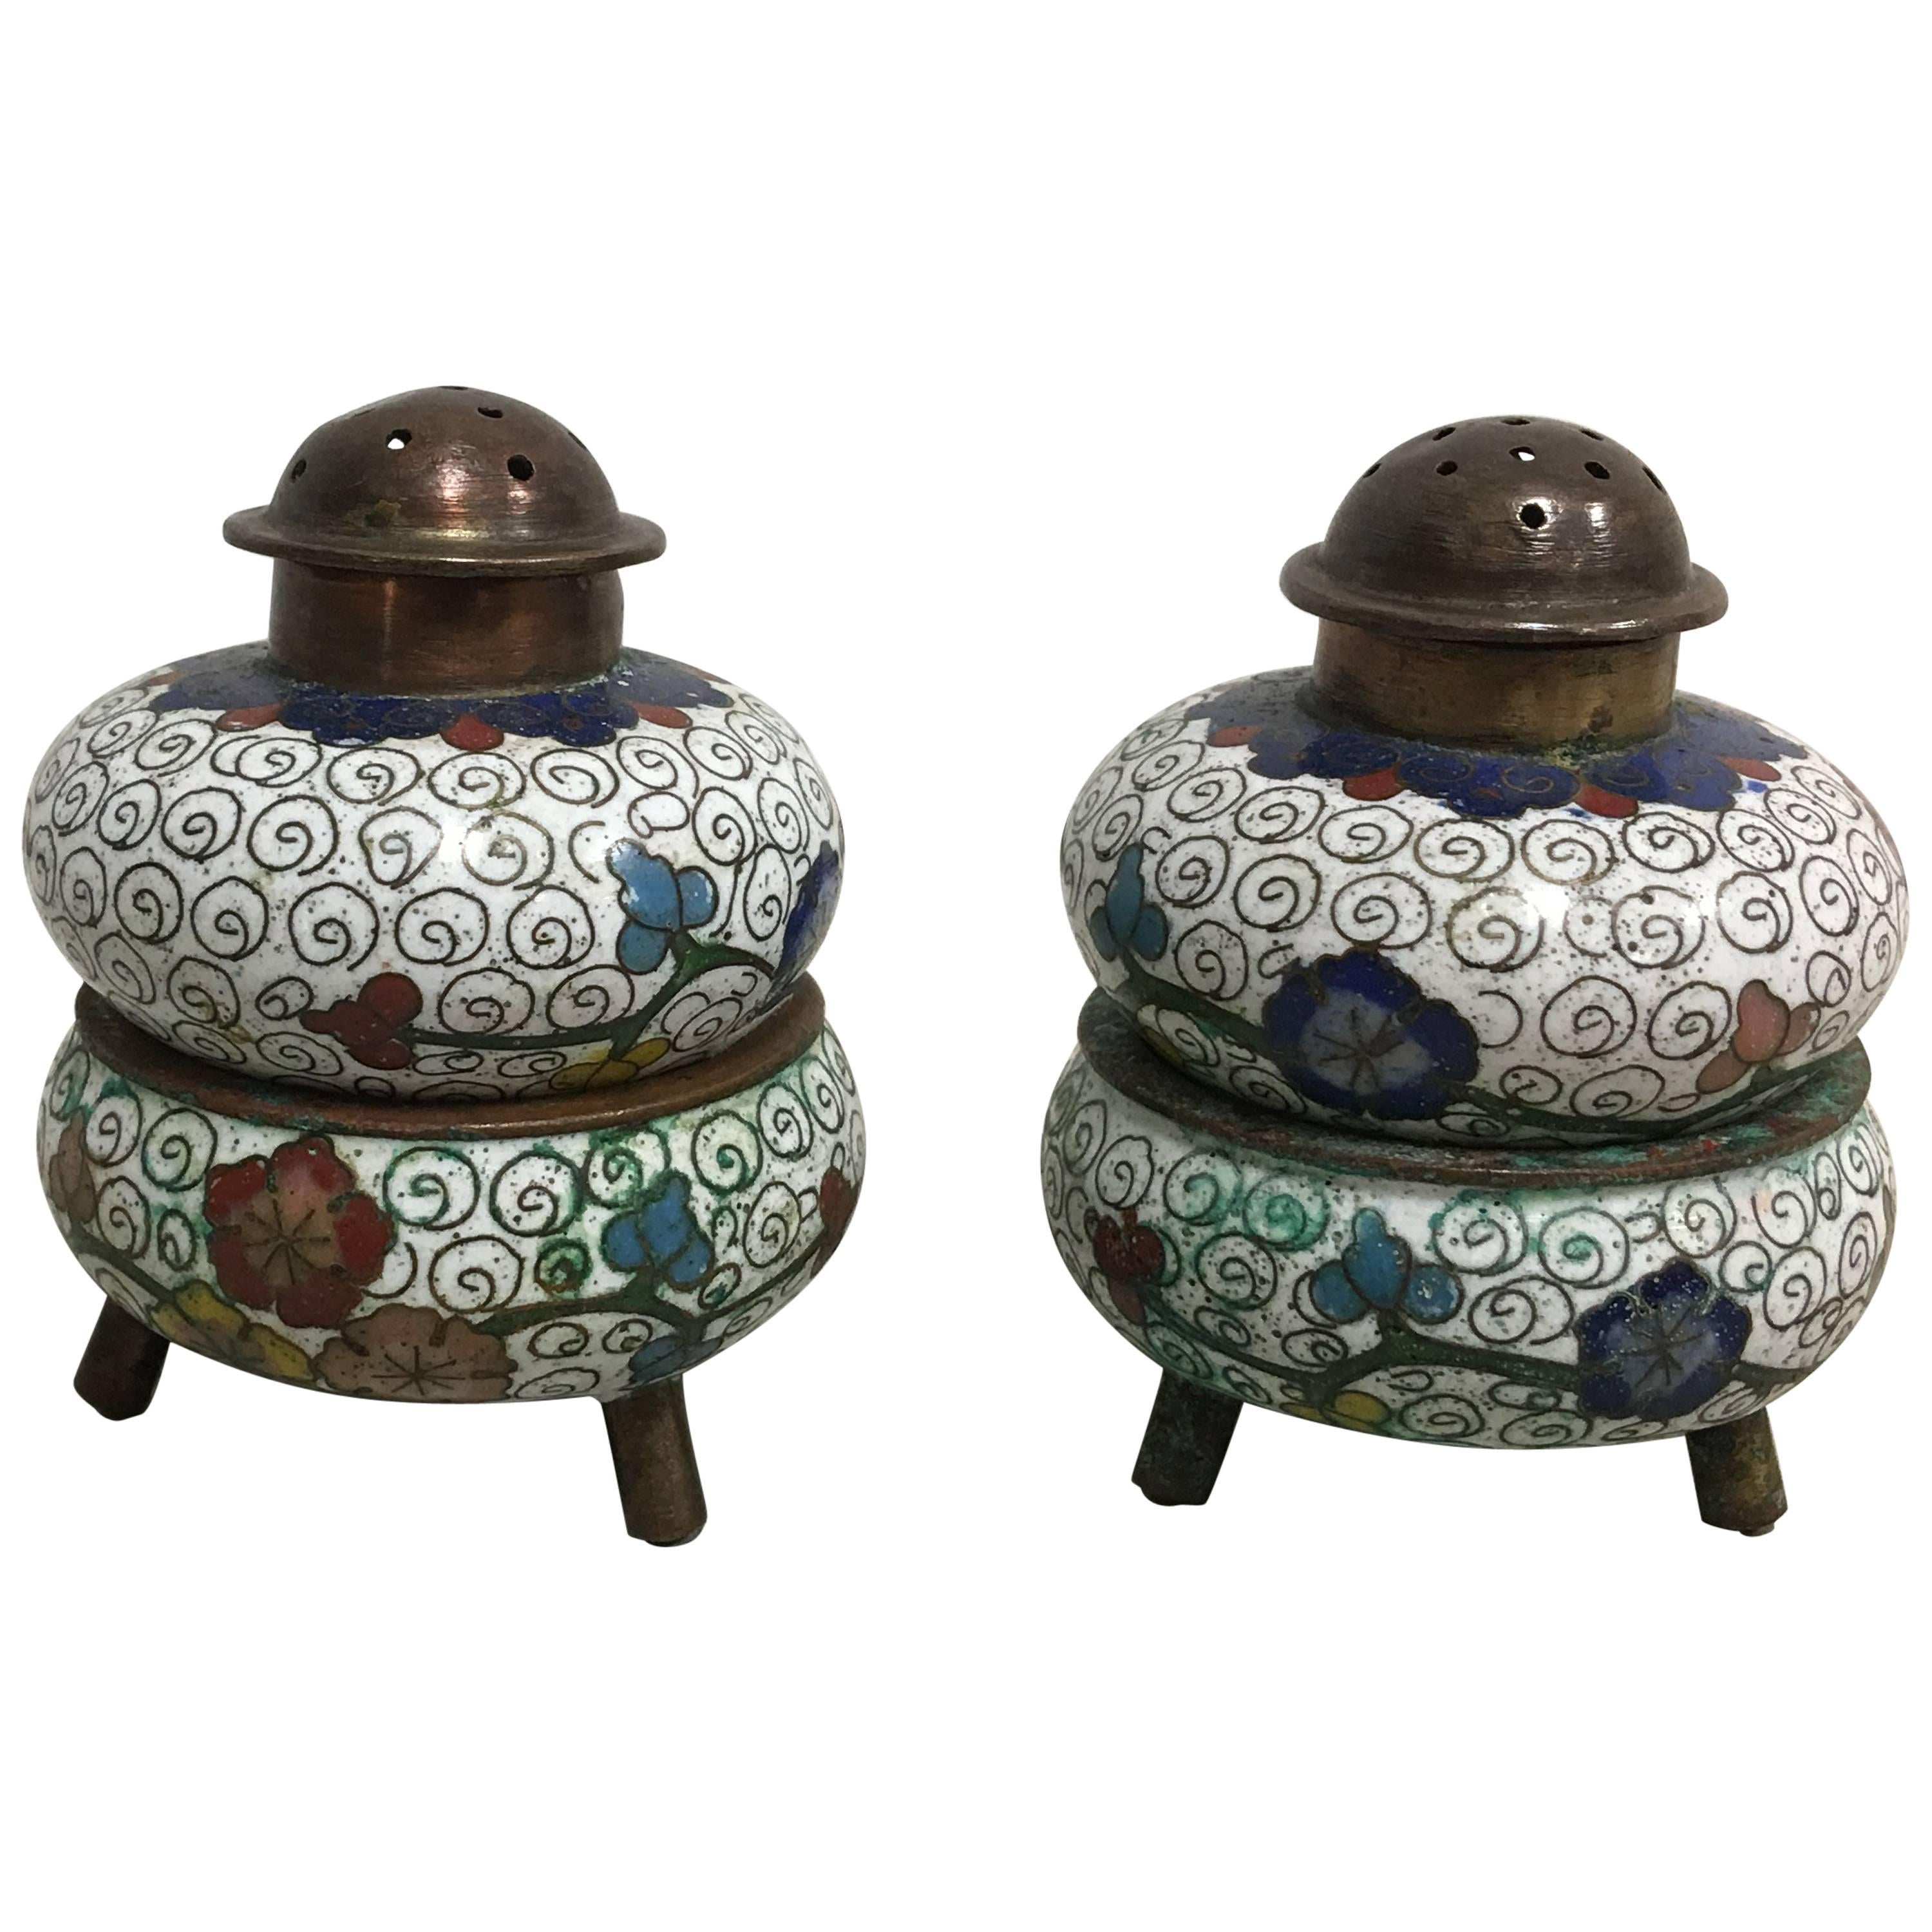 1930s Cloisonné Salt and Pepper Shakers with Stands